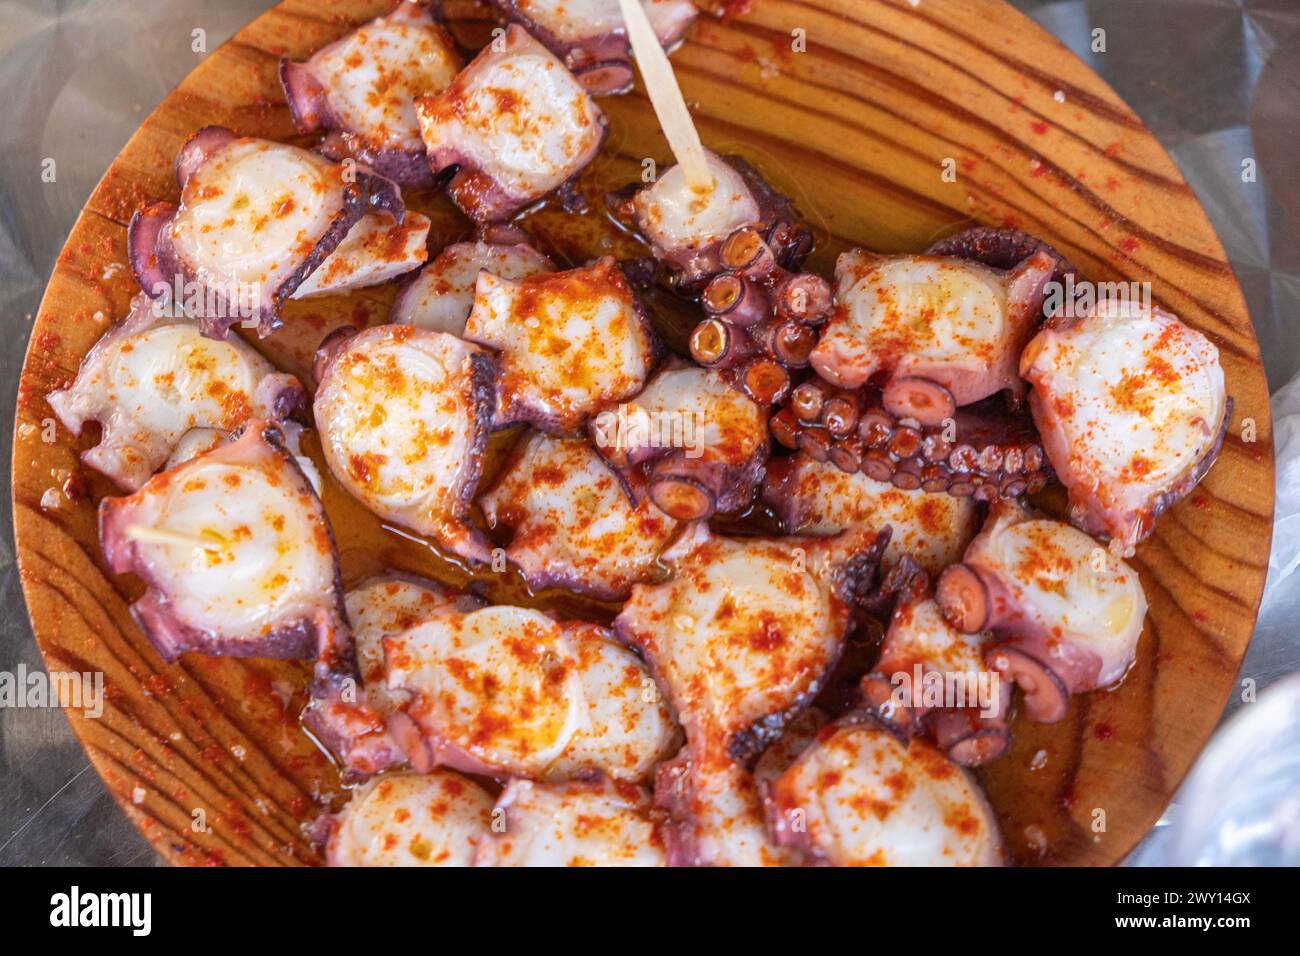 Pulpo a feira, traditional recipe for cooking octopus in Galicia, Spain Stock Photo